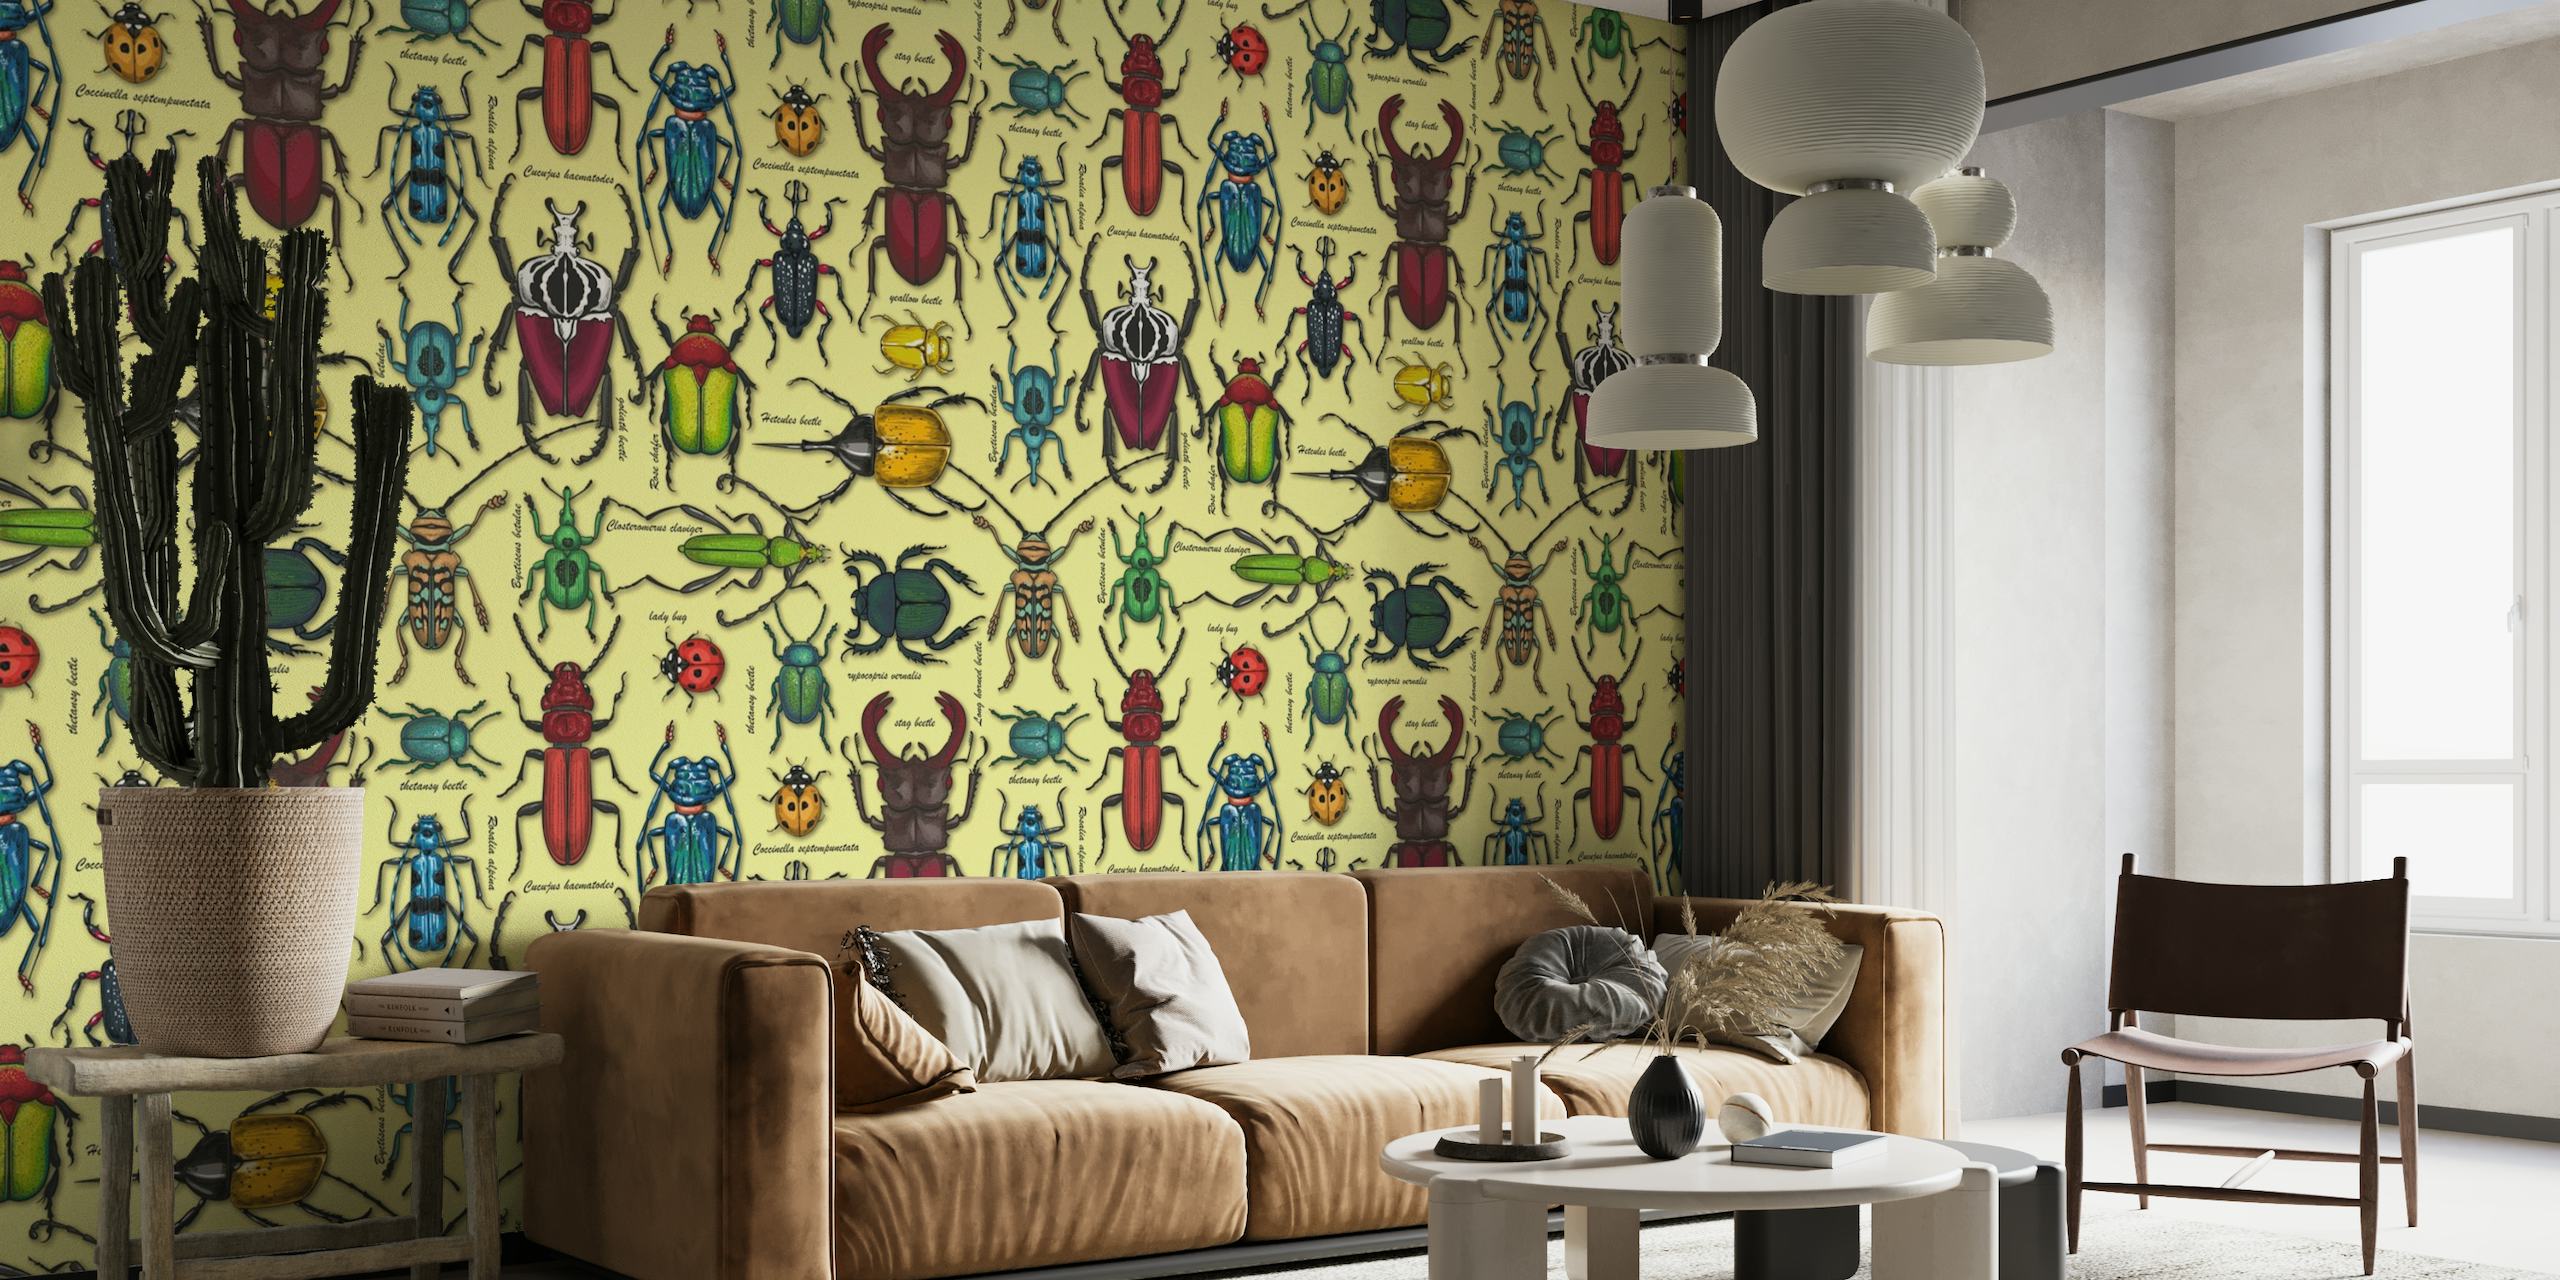 Colorful beetles illustrated wall mural on a yellow background